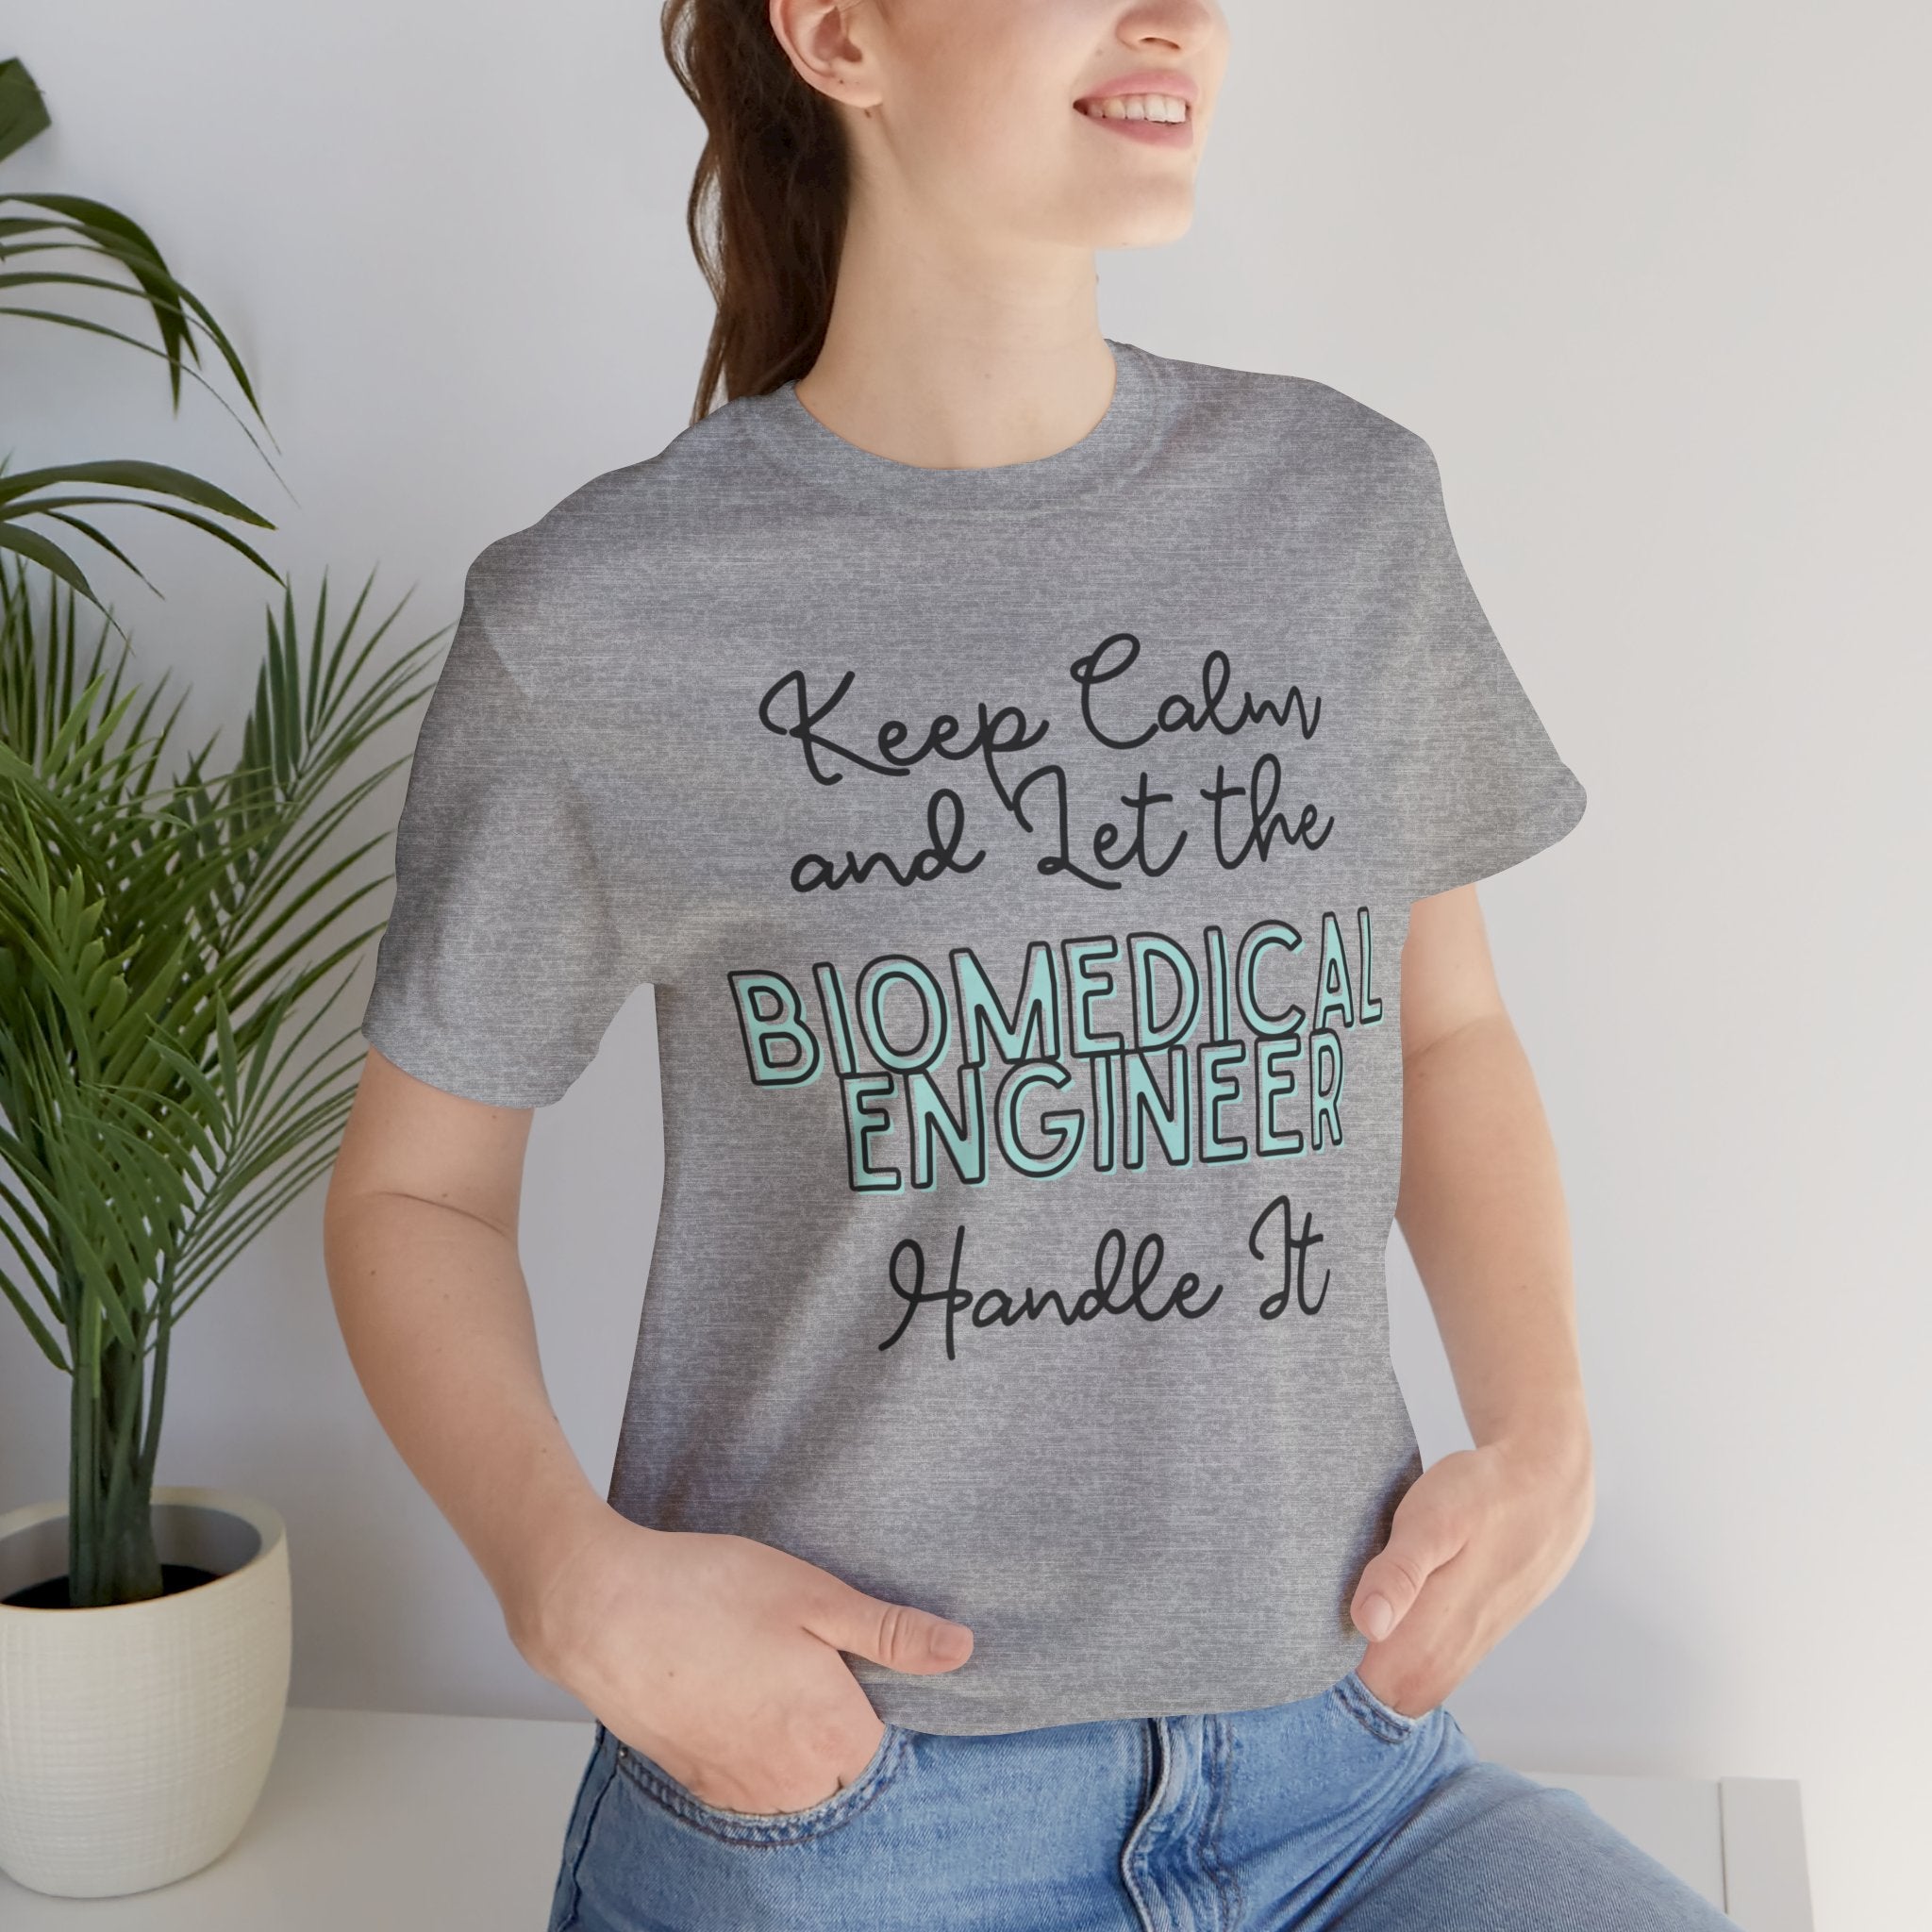 Keep Calm and let the Biomedical Engineer handle It - Jersey Short Sleeve Tee